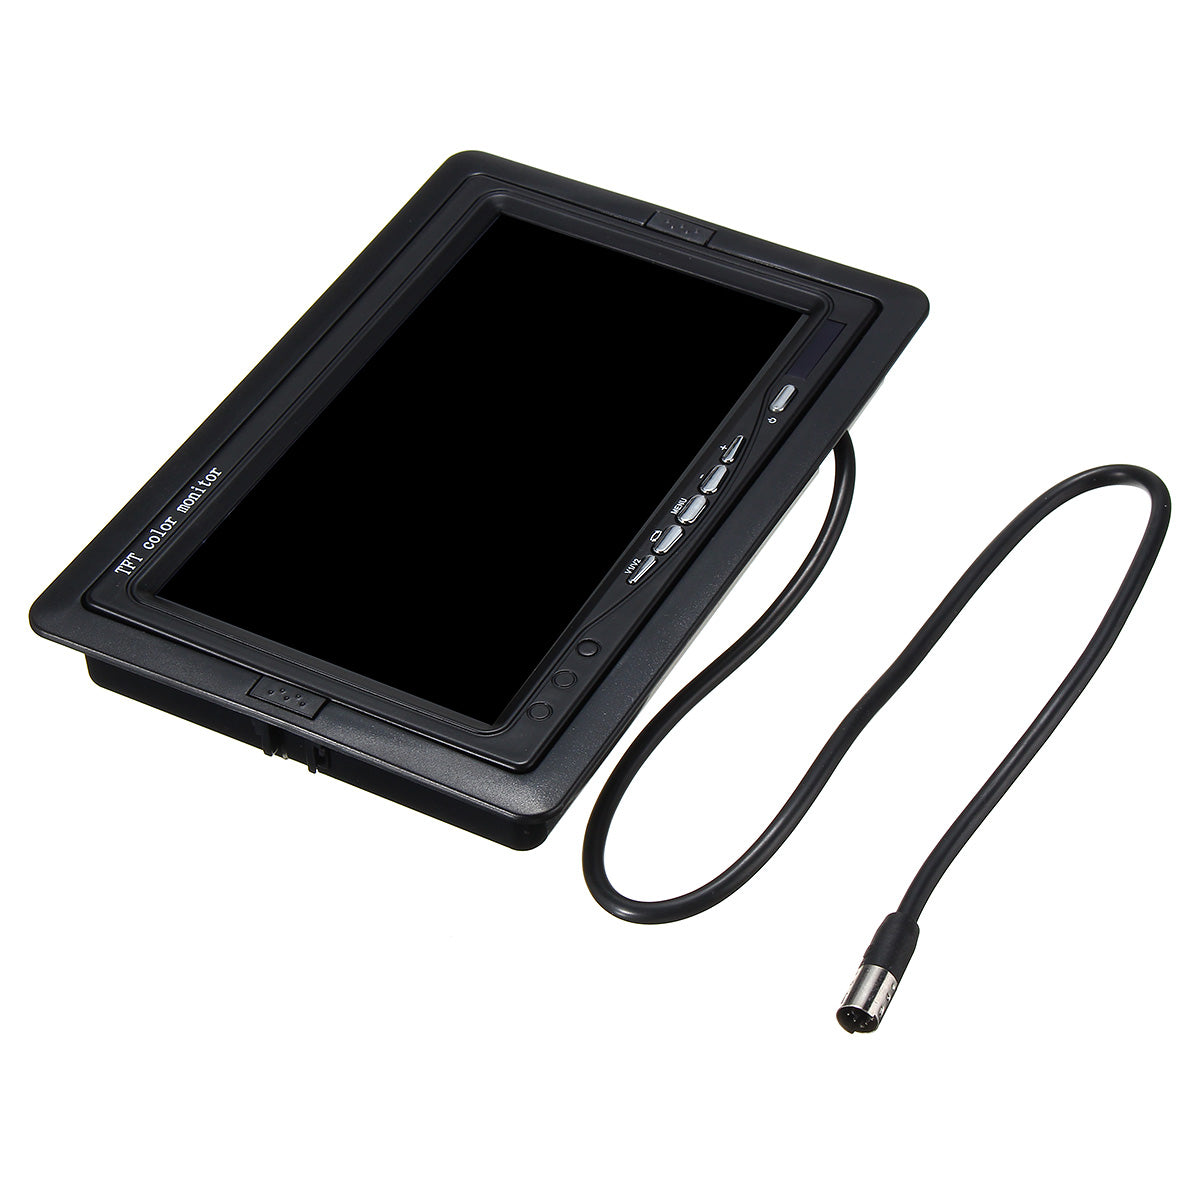 7 Inch Car Rear View Headrest Monitor DVD Player VCR Monitor TFT LCD Display Adjustable Rotating - Auto GoShop